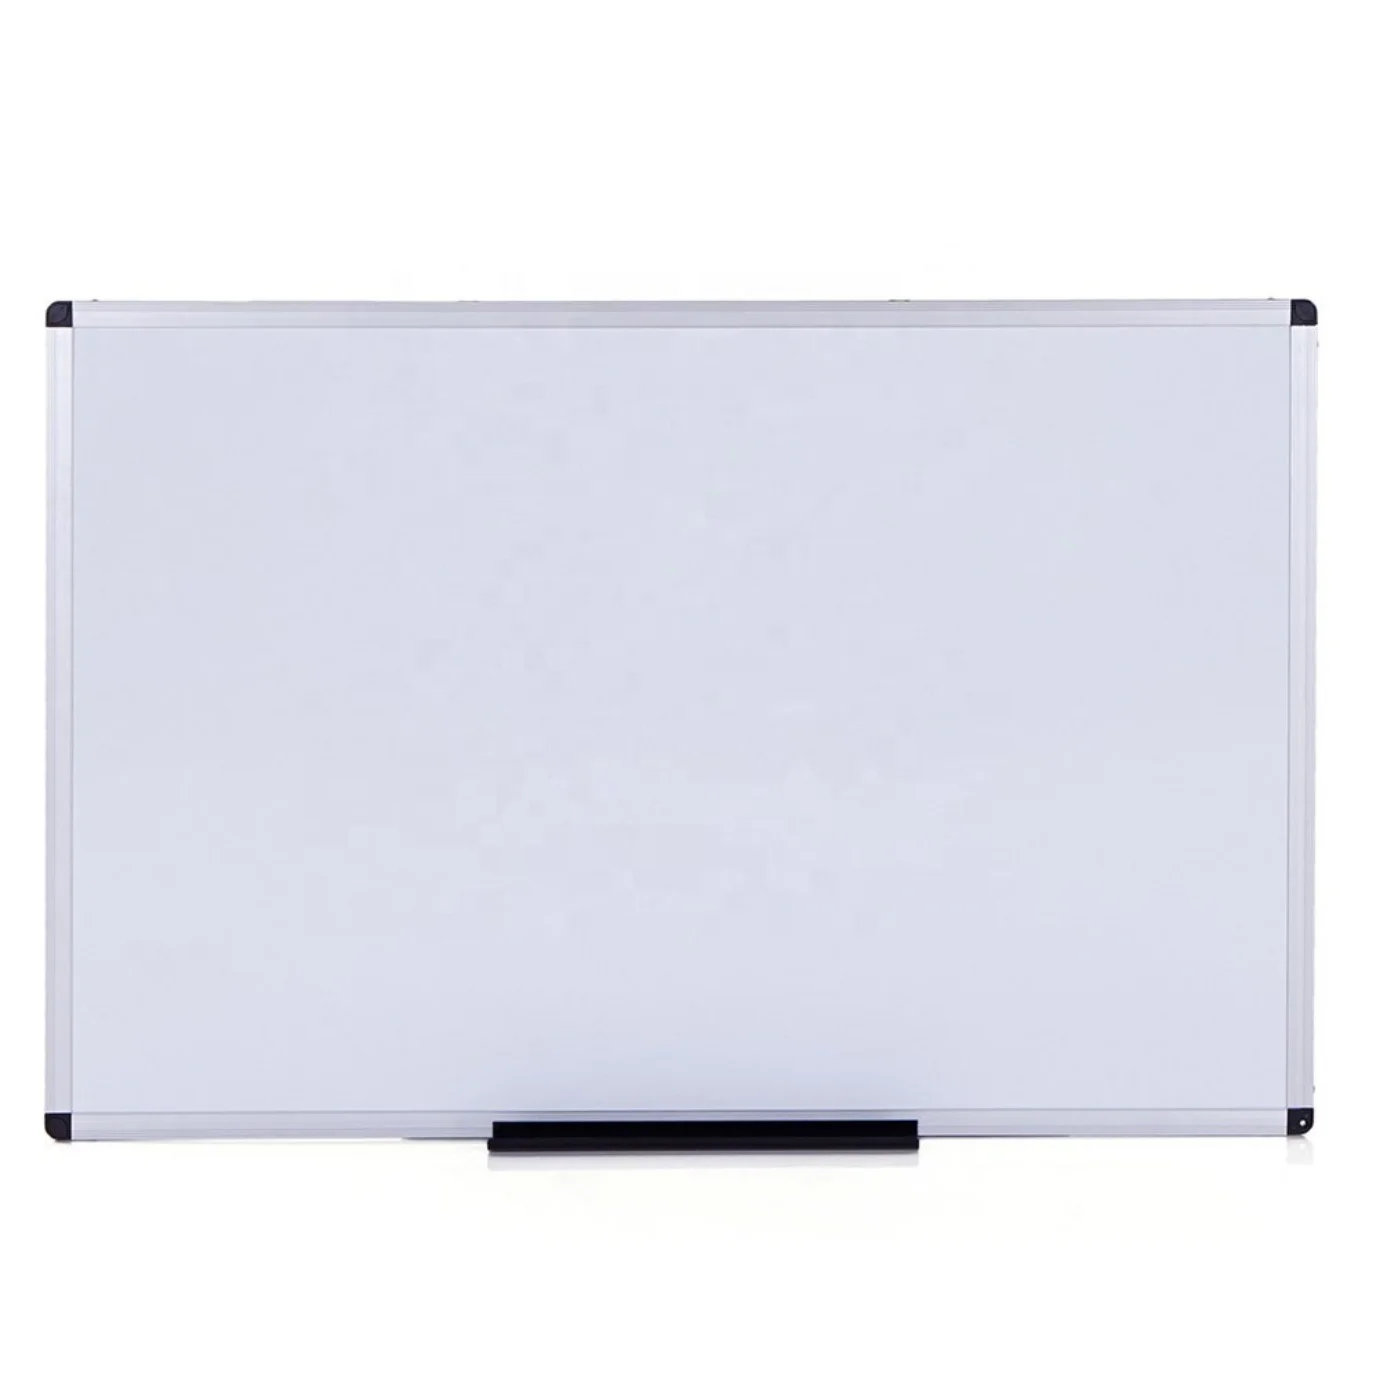 Single Side Magnetic Dry Erase Writing White Board Hanging Message Scoreboard for sale online 